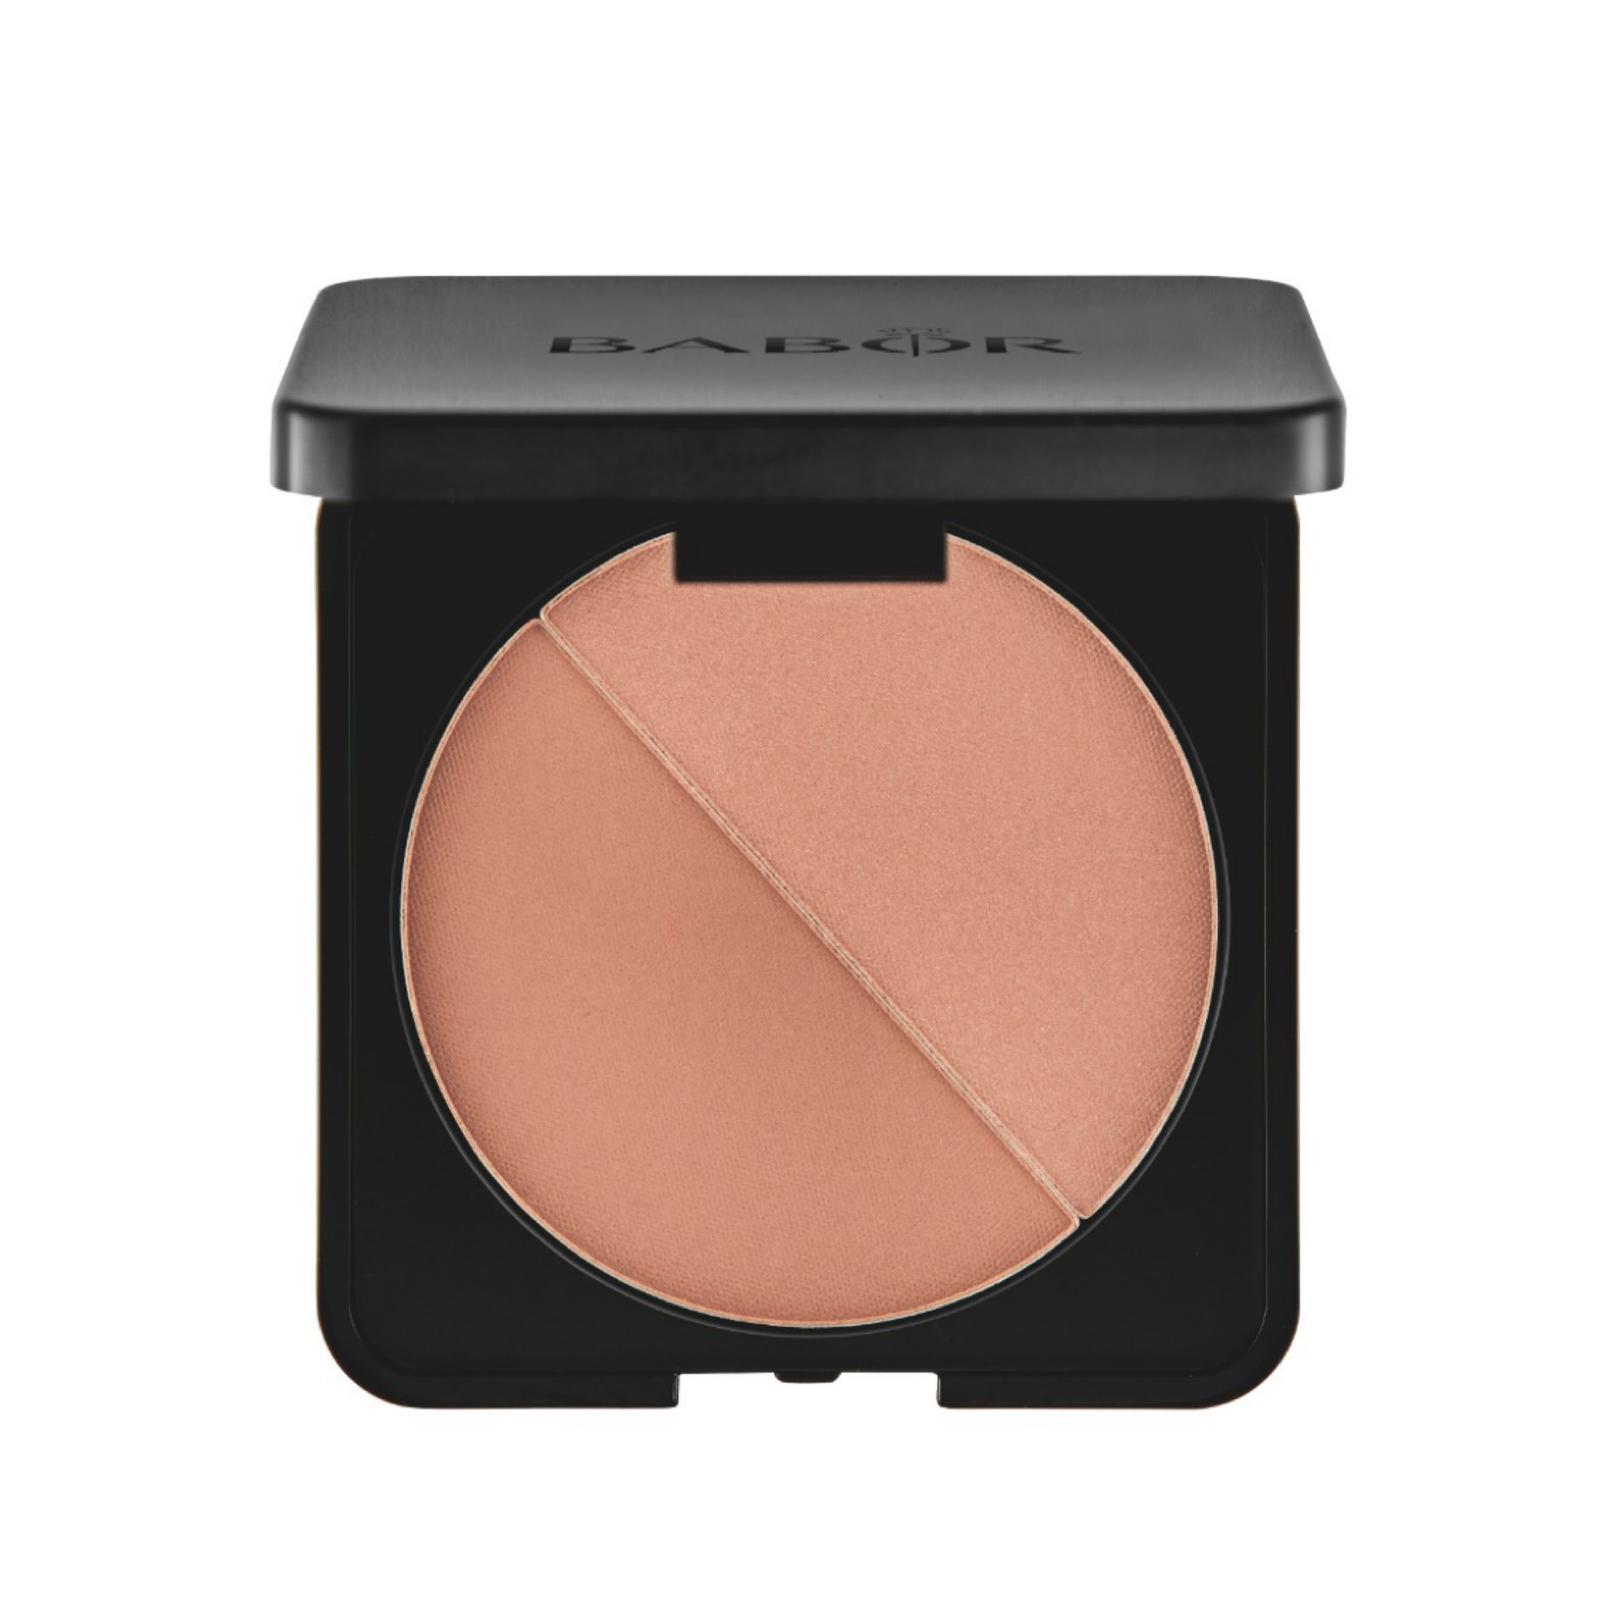 Powders, Blushes and more